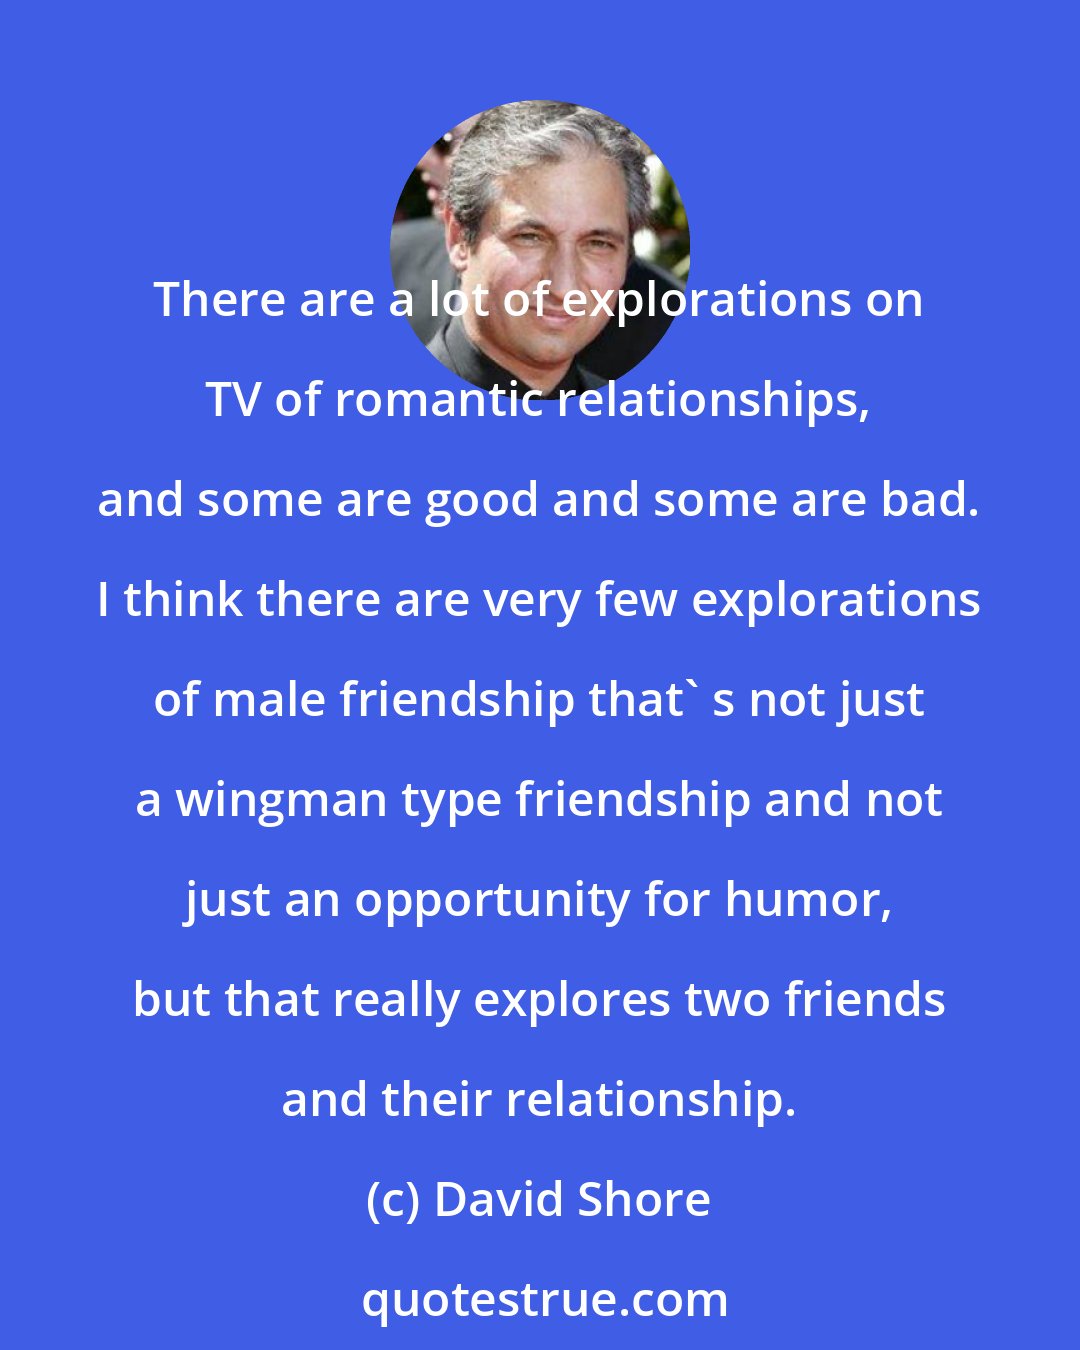 David Shore: There are a lot of explorations on TV of romantic relationships, and some are good and some are bad. I think there are very few explorations of male friendship that' s not just a wingman type friendship and not just an opportunity for humor, but that really explores two friends and their relationship.